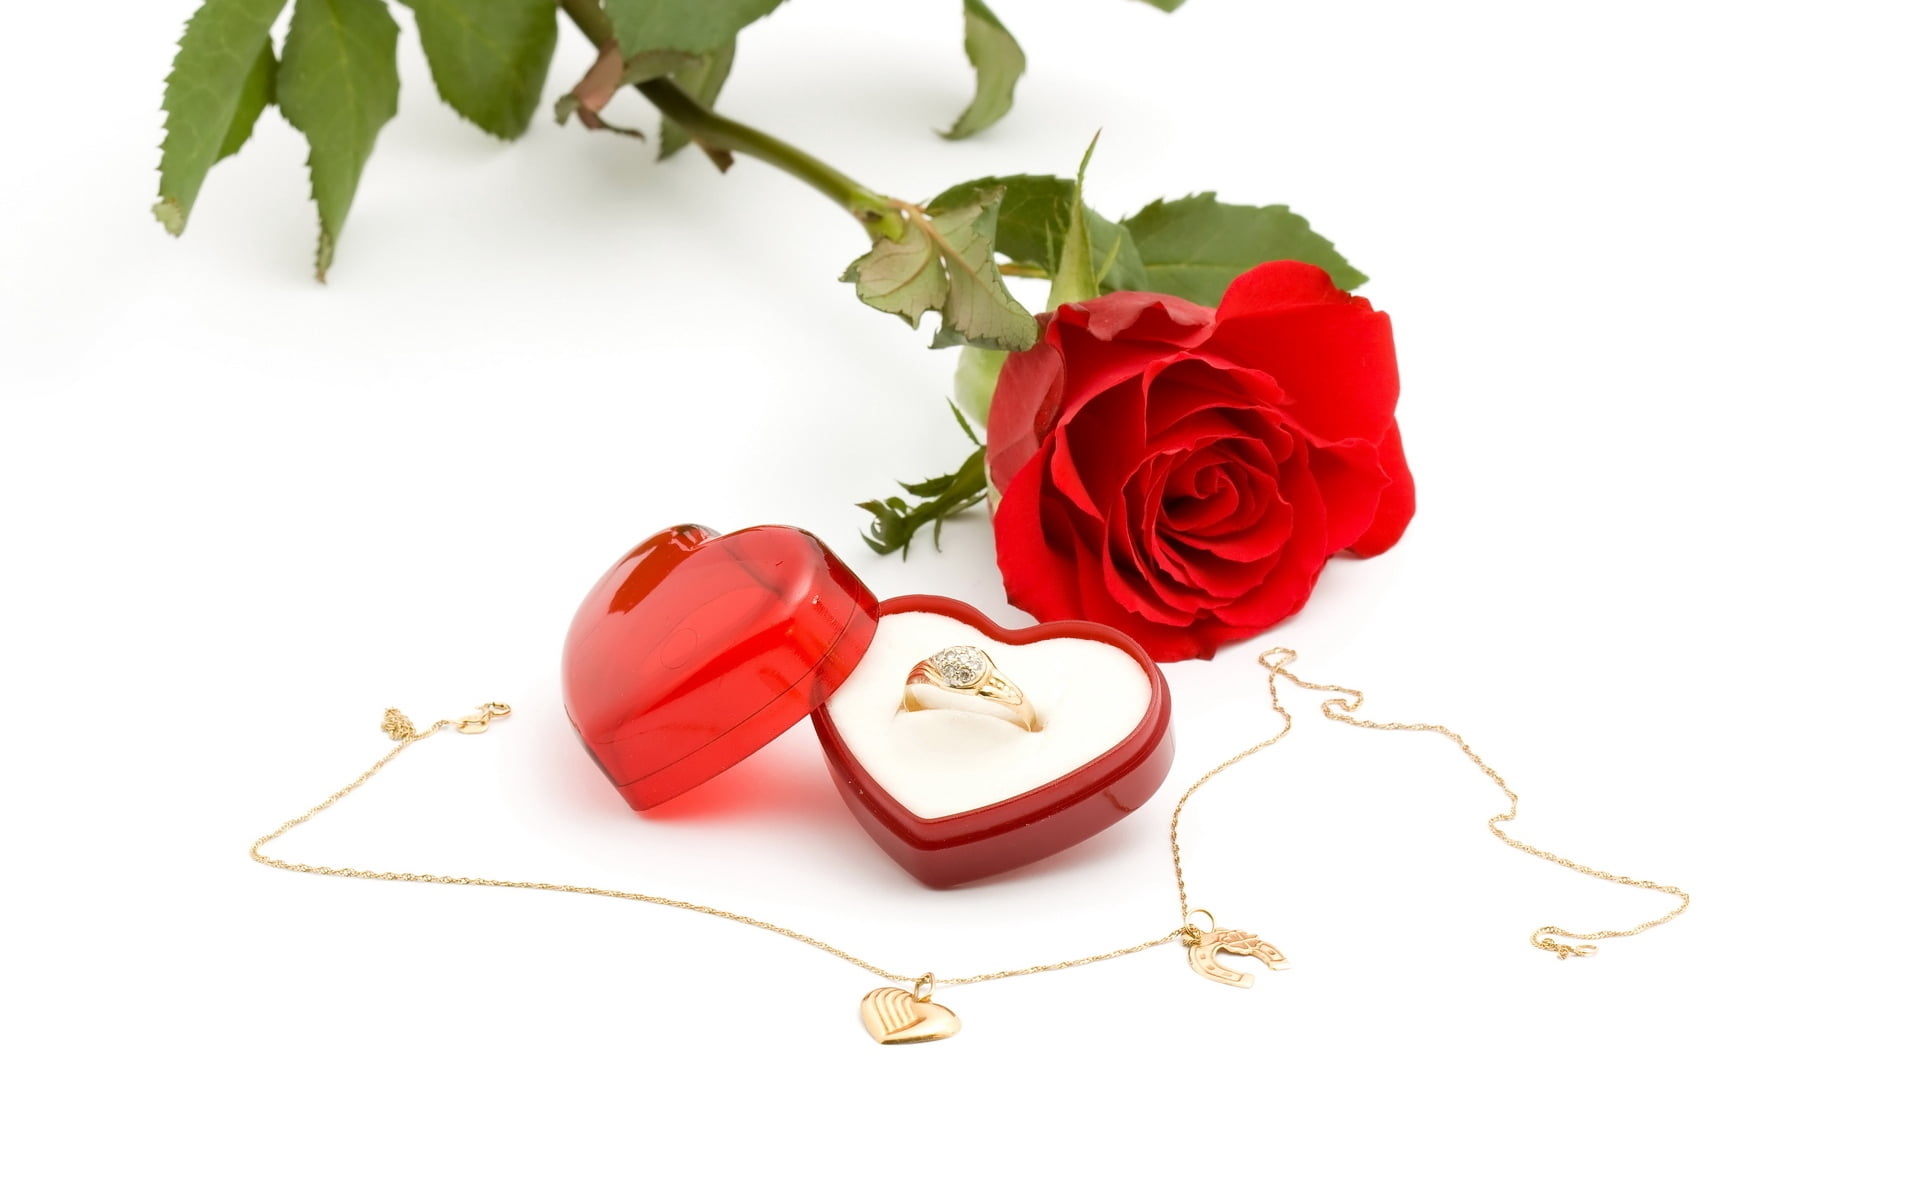 red rose and gold-colored necklace, ring, box, surprise, gift